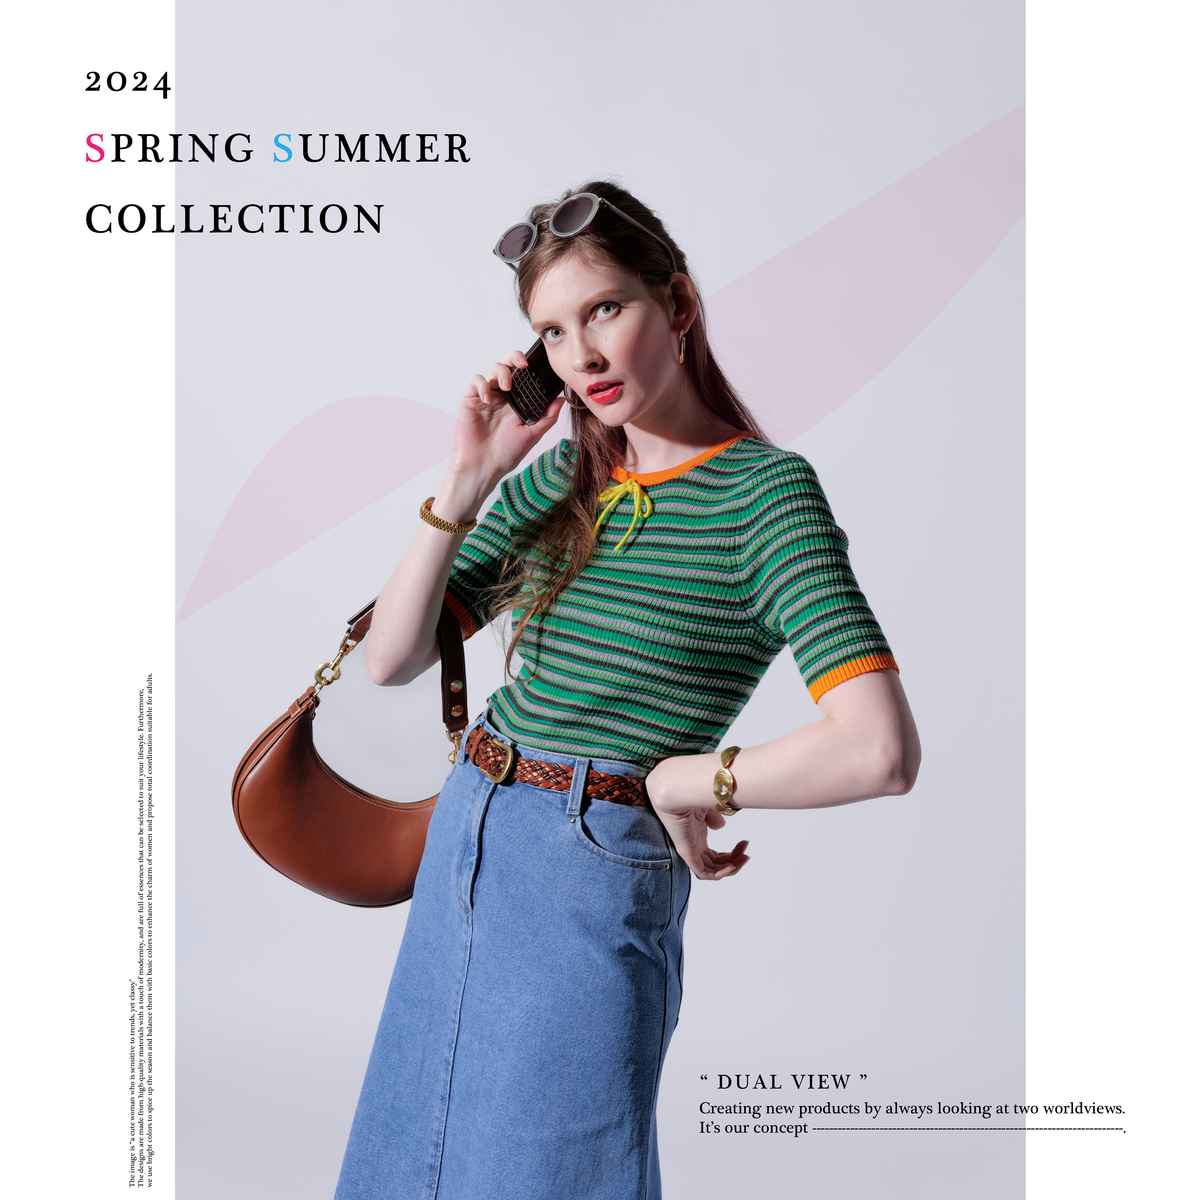 2024 SPRING SUMMER COLLECTION – DUAL VIEW